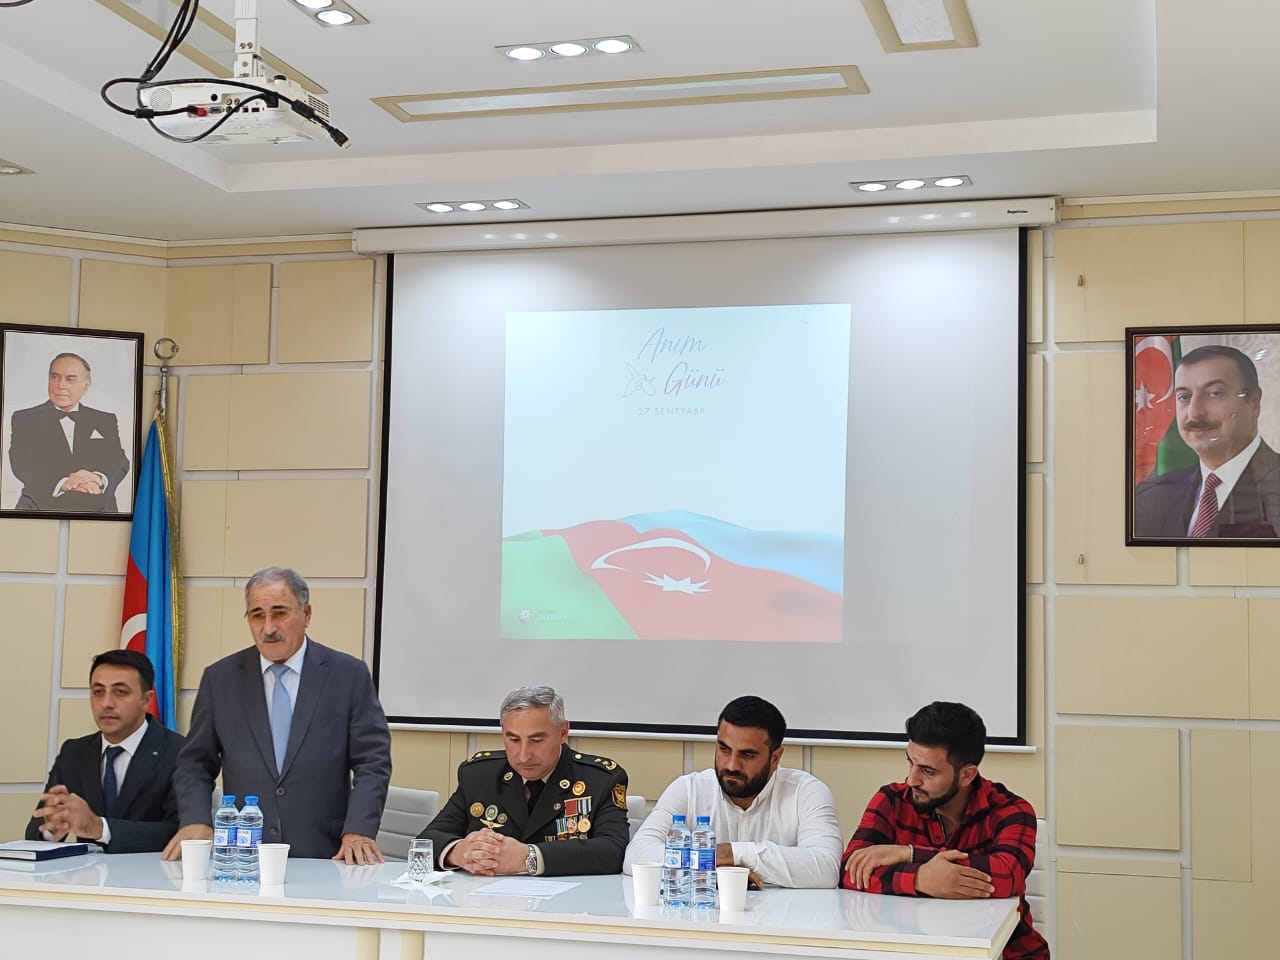 The event was held at the Institute of Soil Science and Agrochemistry on September 27 which was dedicated to Memorial Day.